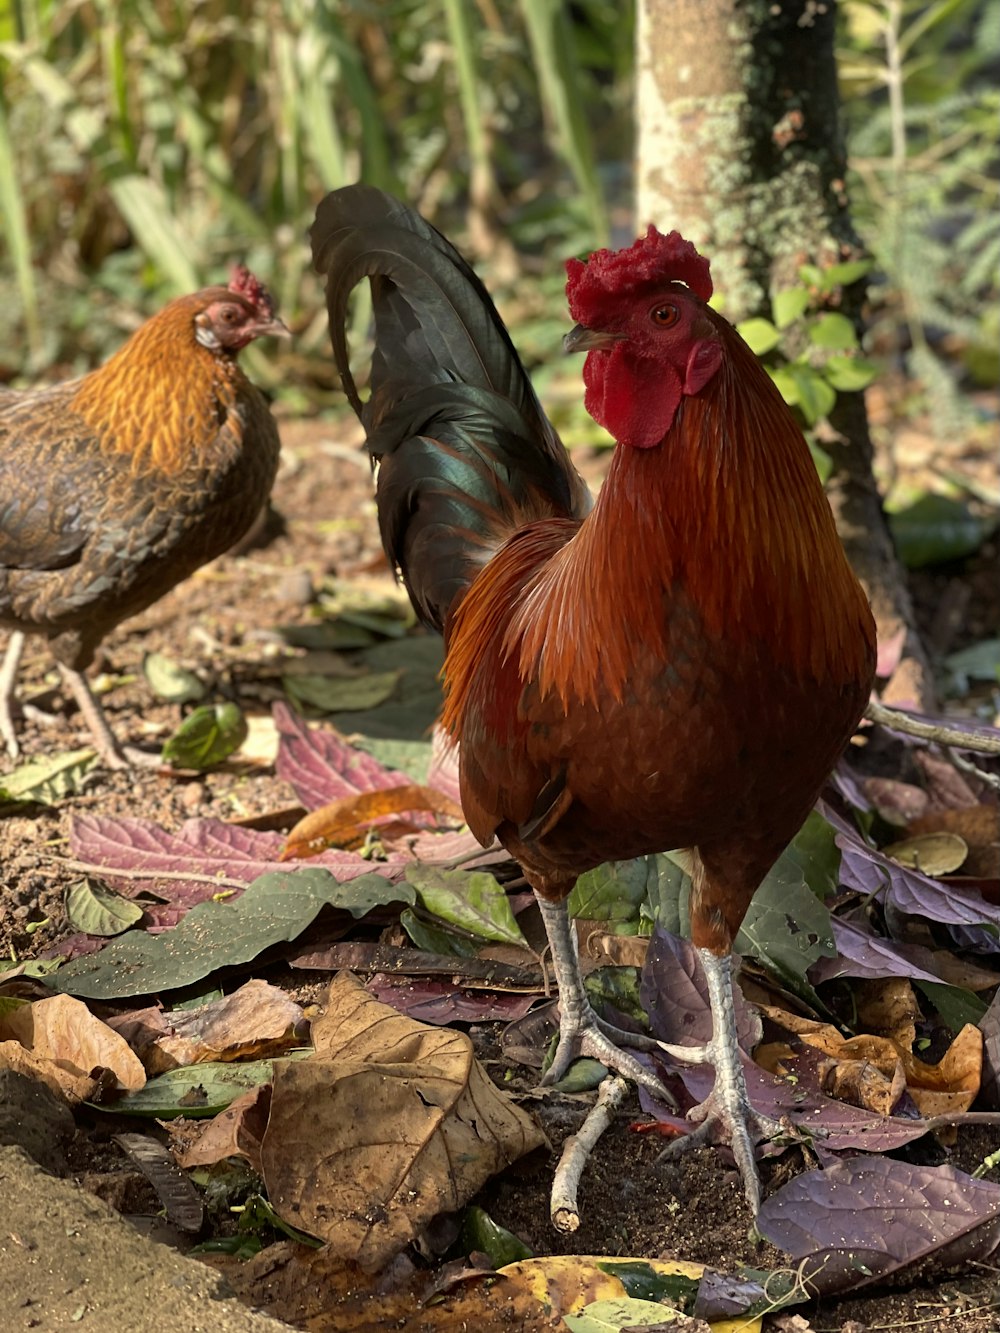 a rooster and a rooster are standing on the ground